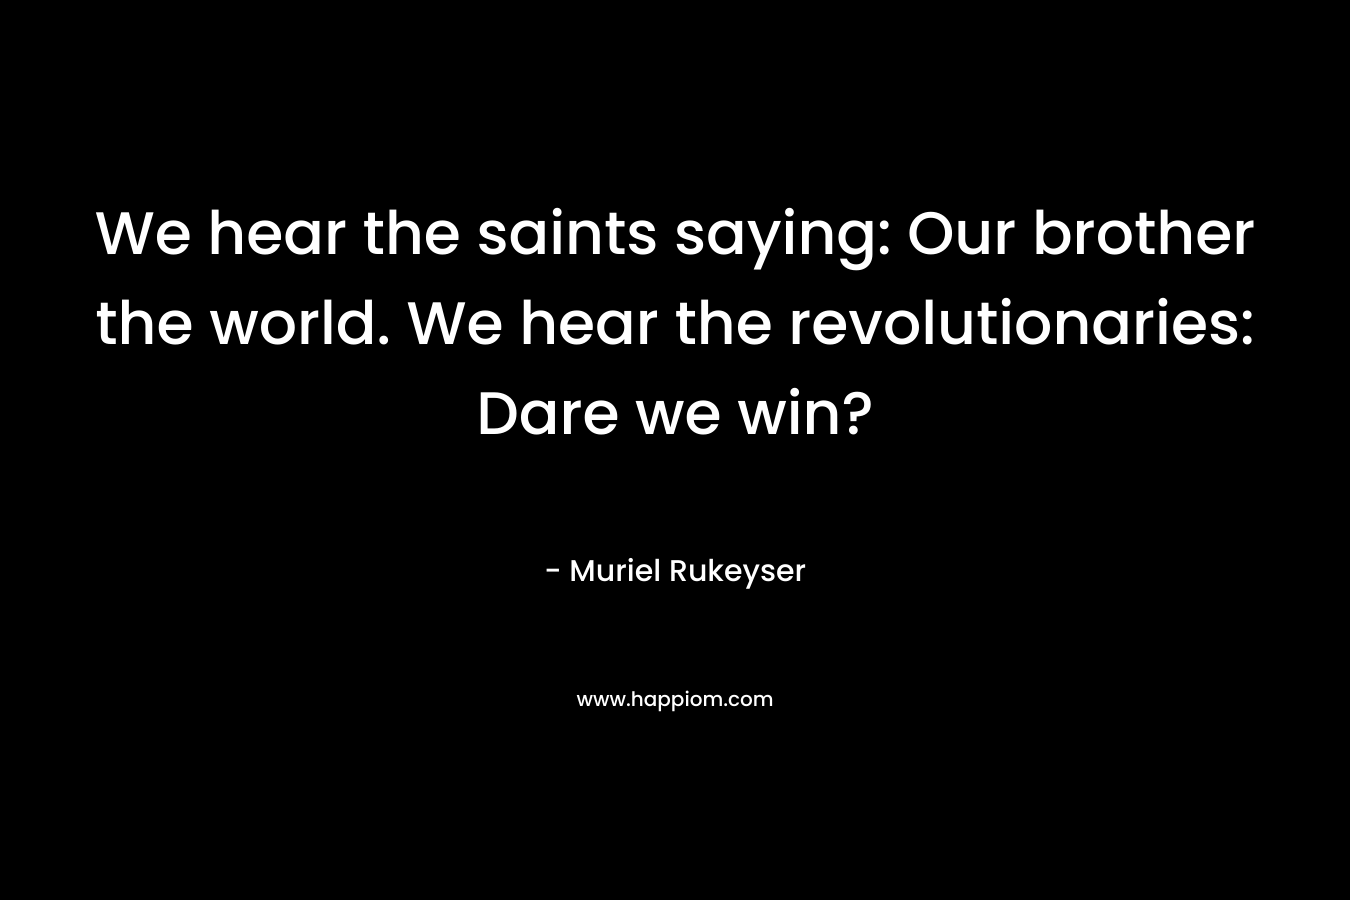 We hear the saints saying: Our brother the world. We hear the revolutionaries: Dare we win? – Muriel Rukeyser